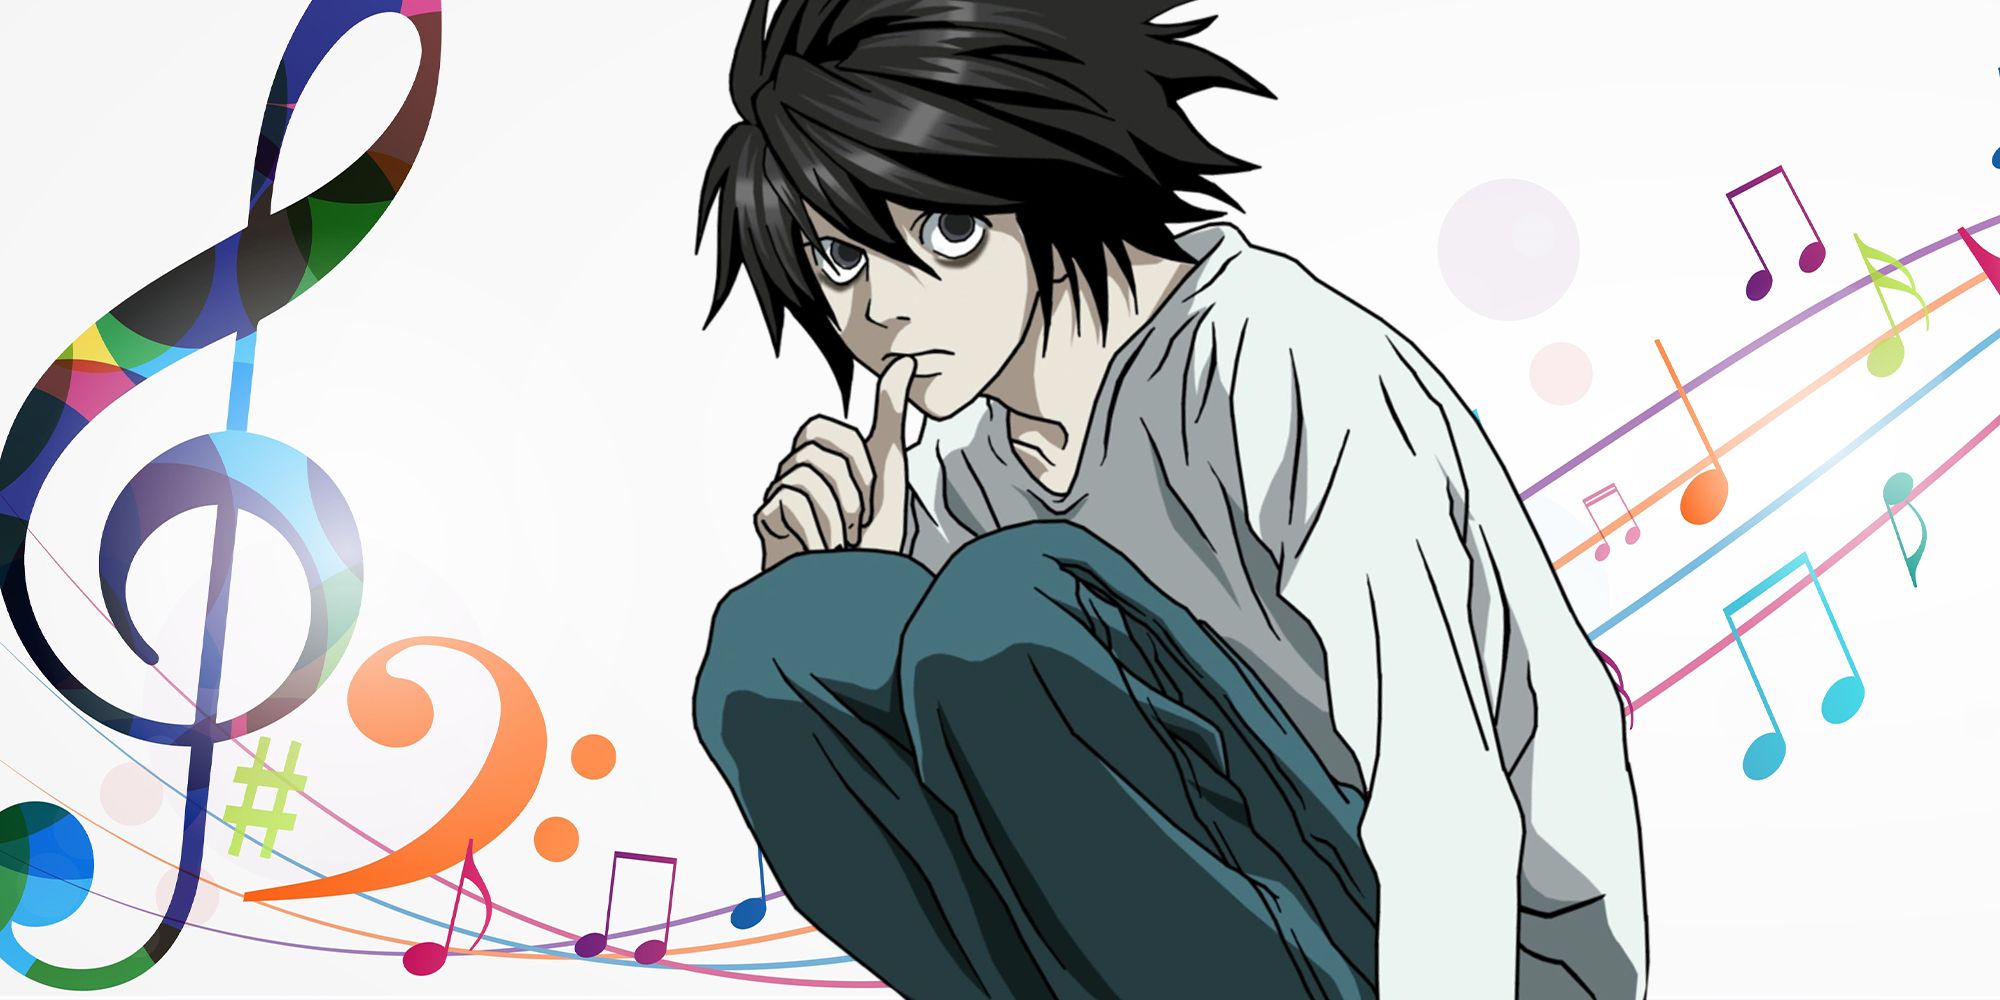 L from Death Note with a musical background